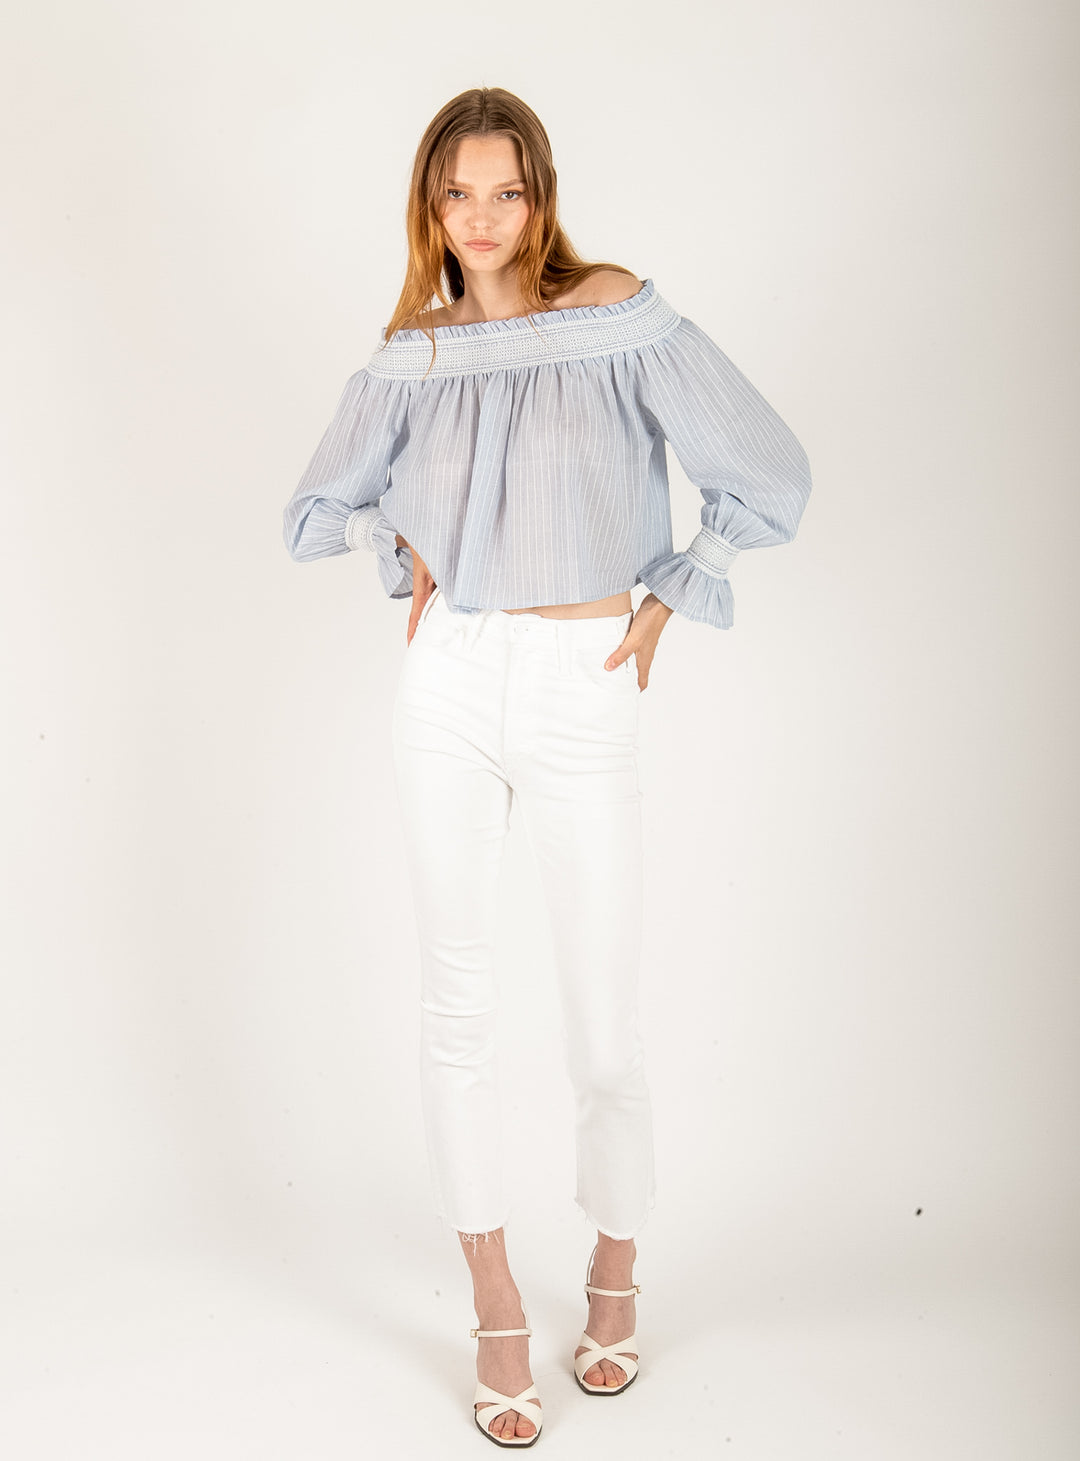 Andie Blouse - Organic Cotton